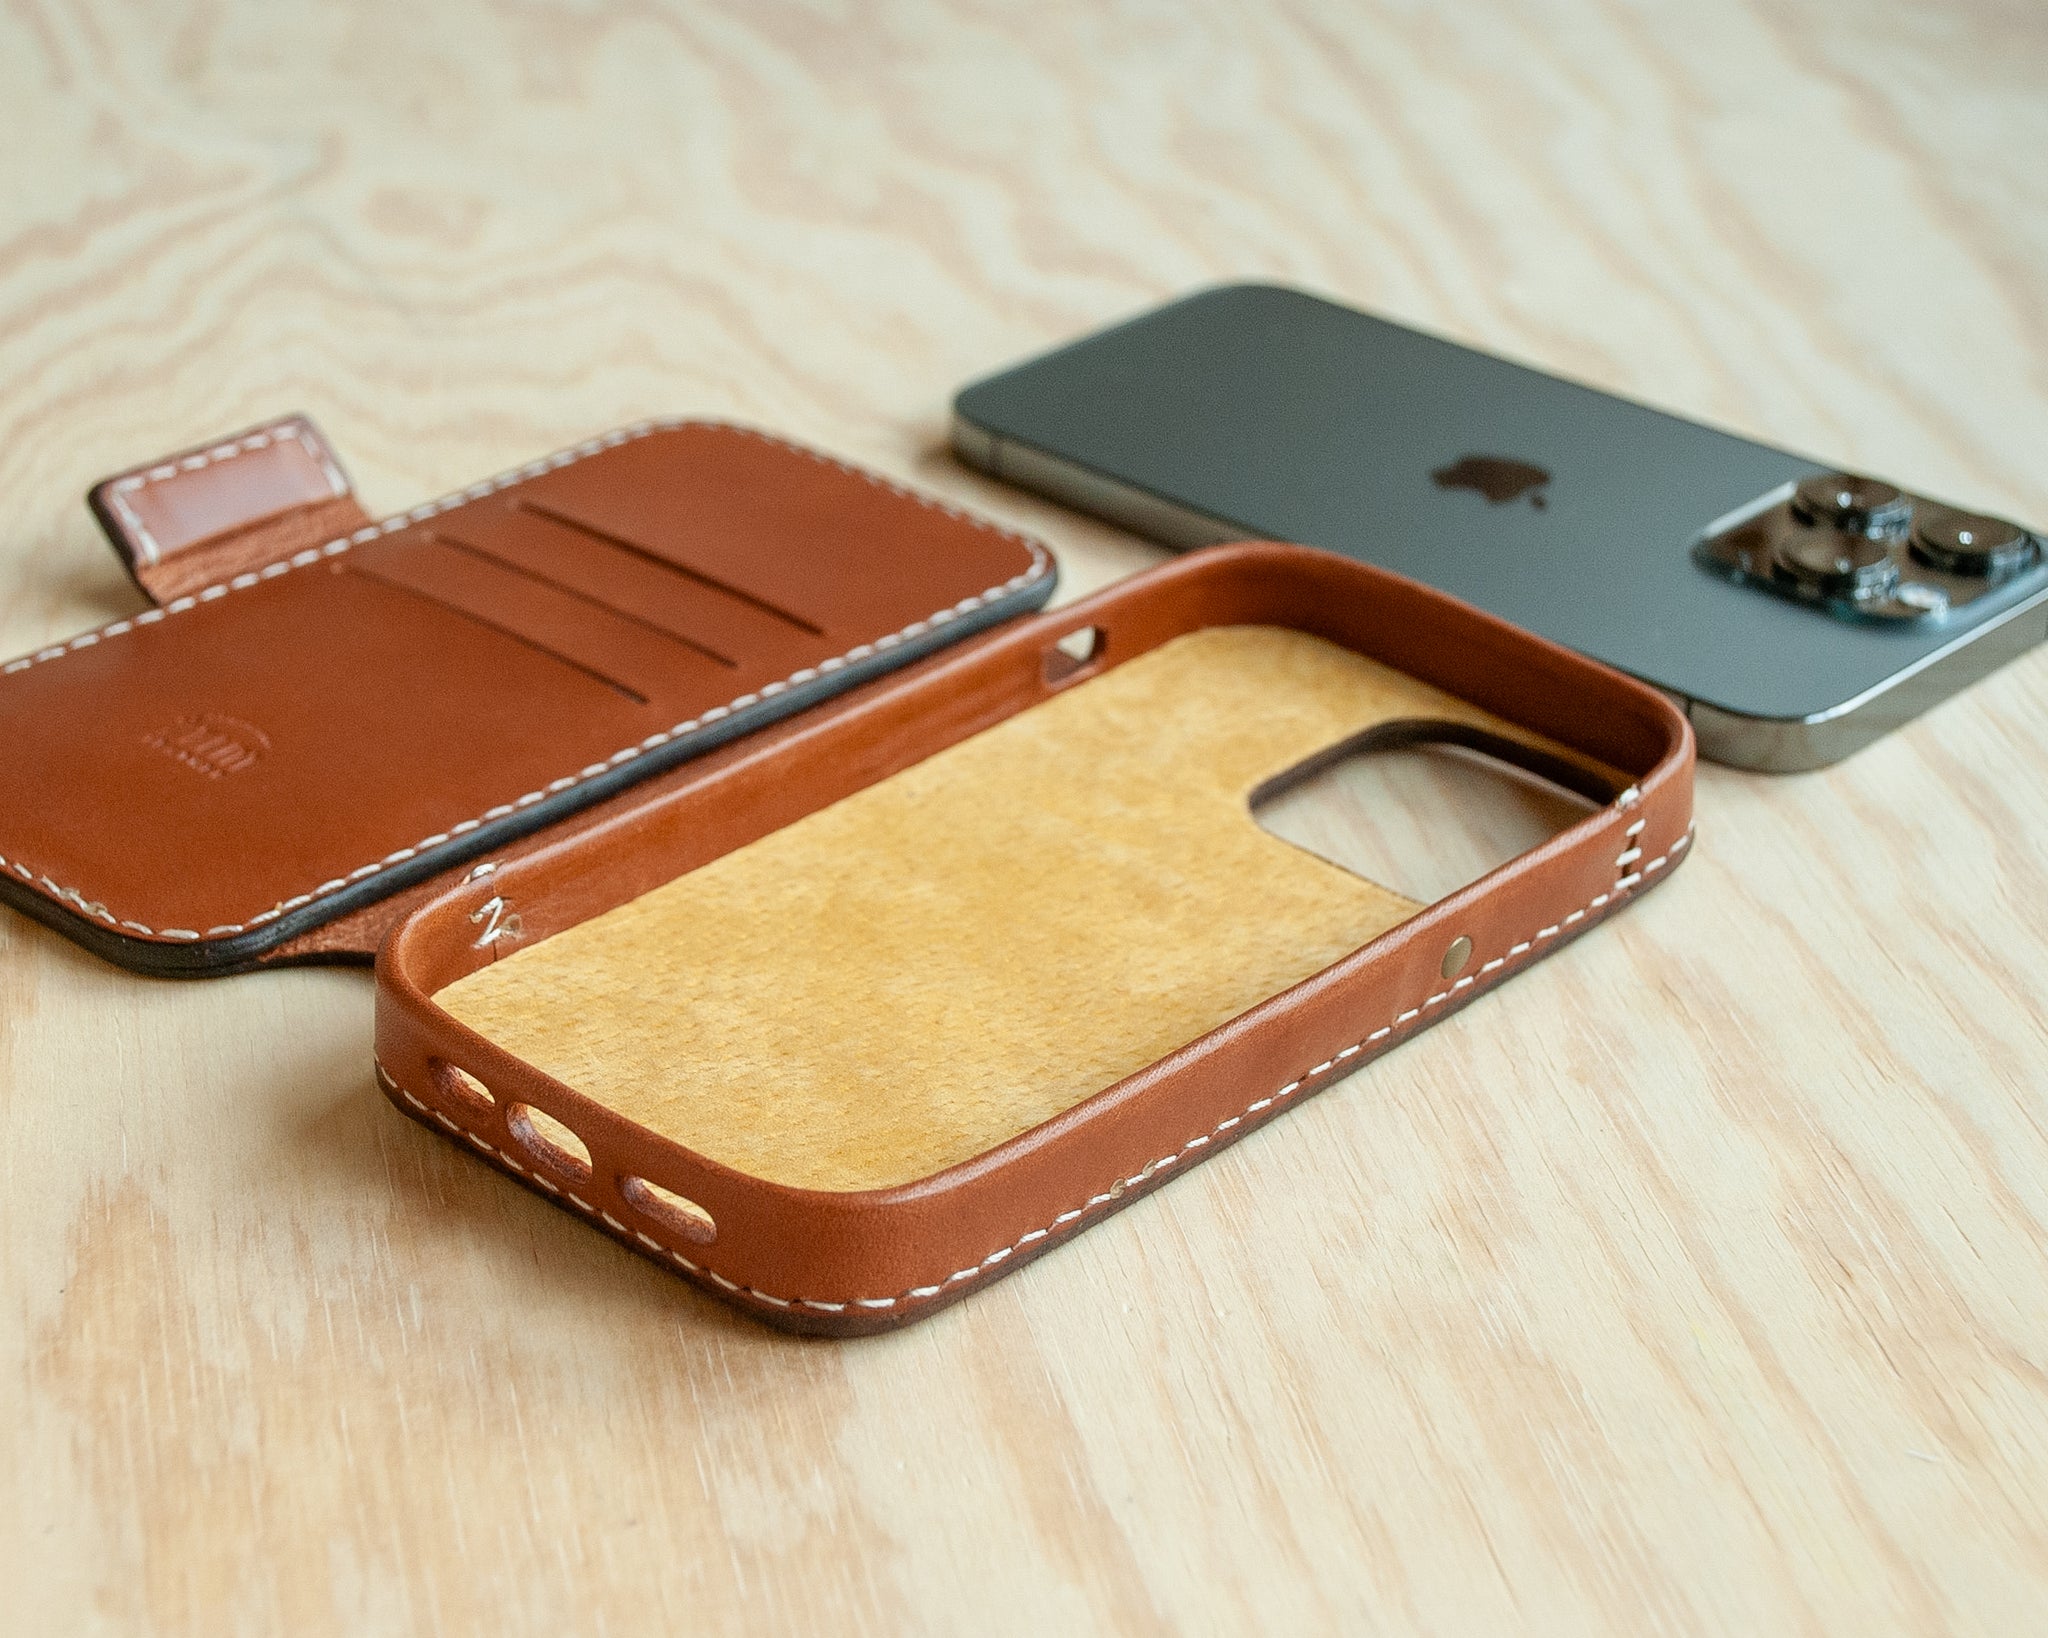 Custom Leather Phone Wallet  Iphone leather case, Leather phone wallet, Leather  phone pouch